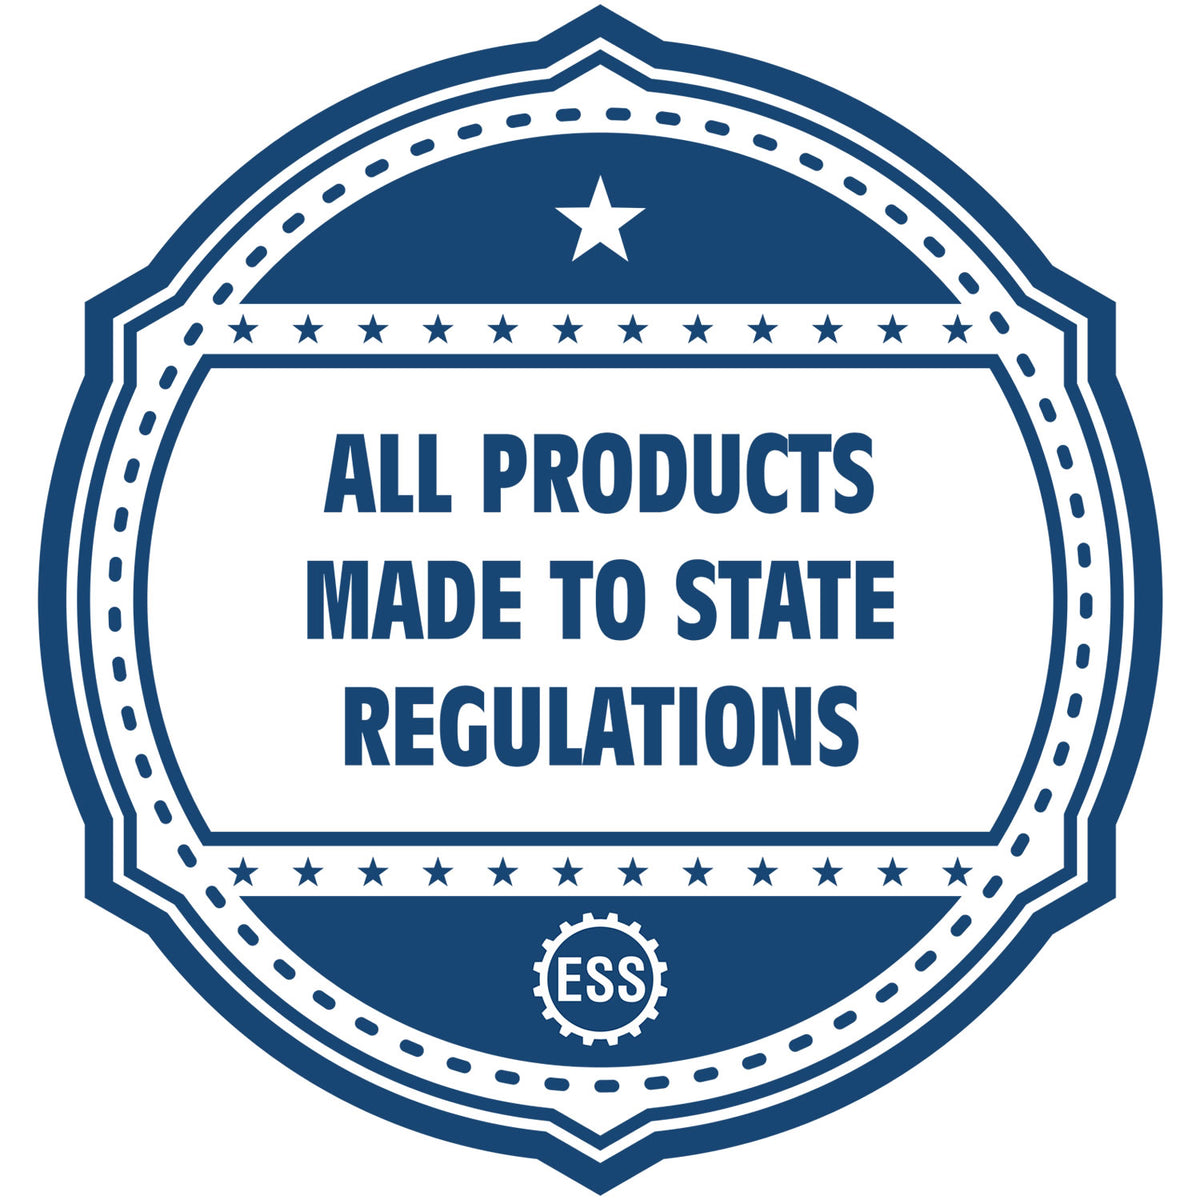 An icon or badge element for the Slim Pre-Inked Wisconsin Professional Engineer Seal Stamp showing that this product is made in compliance with state regulations.